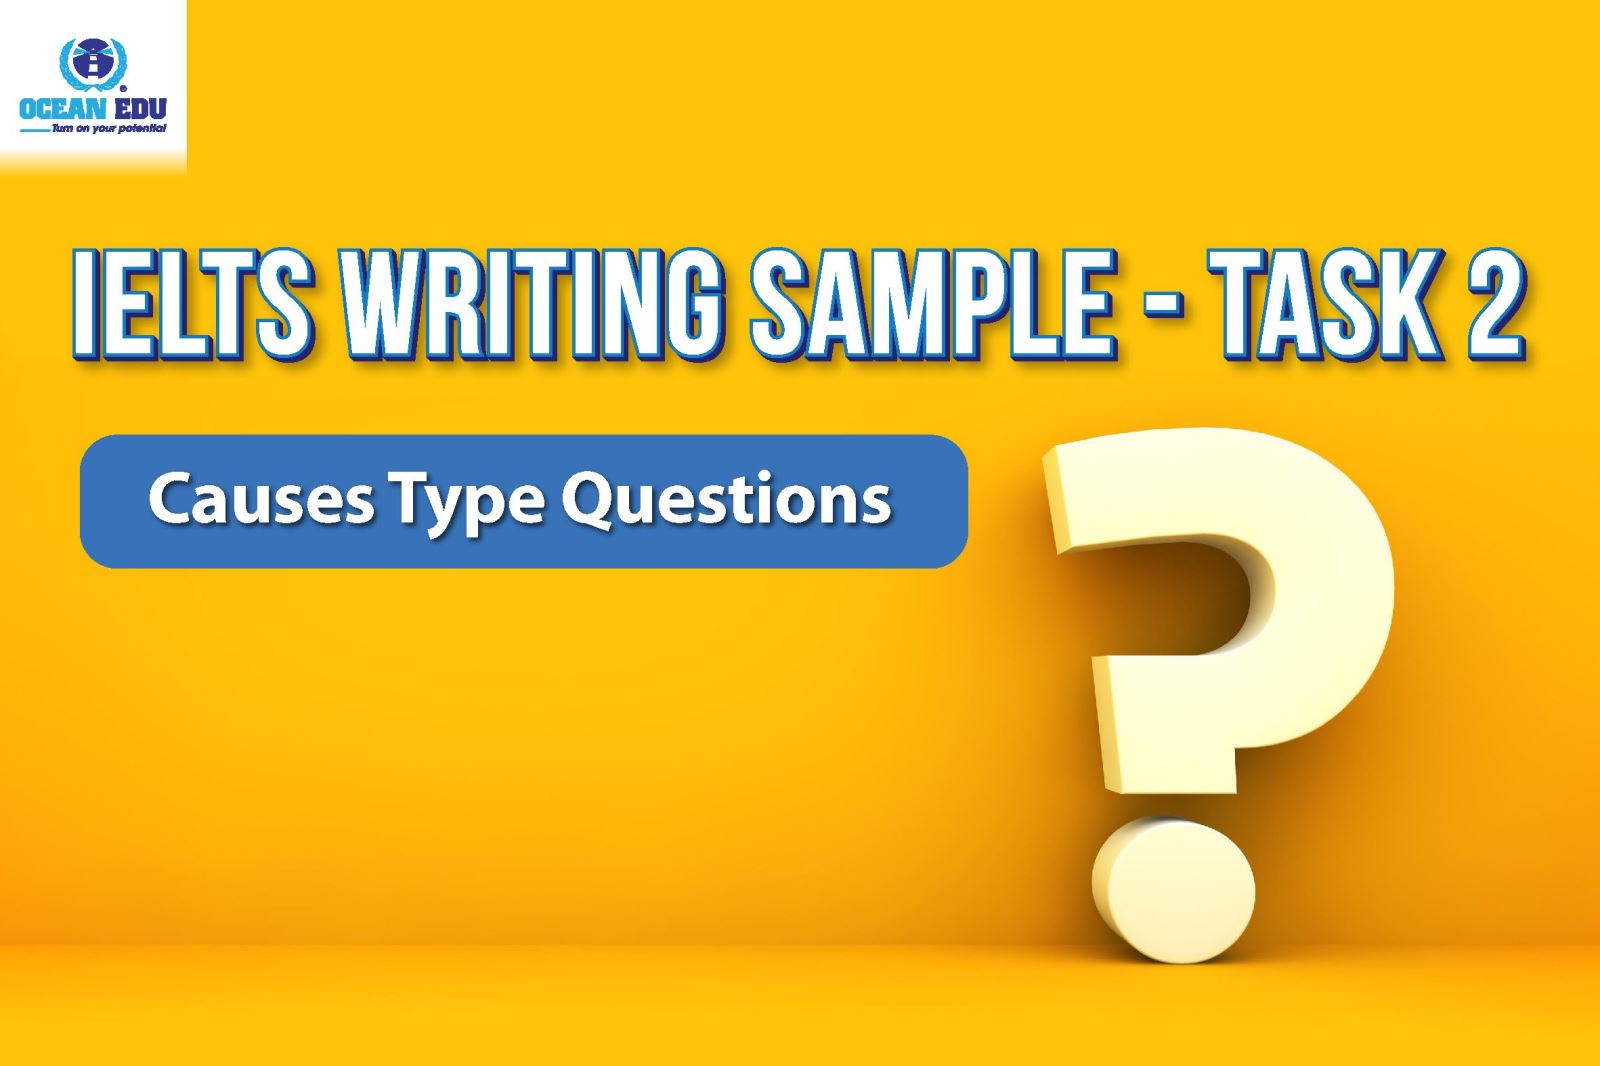 IELTS Writing Sample - Causes Type Questions